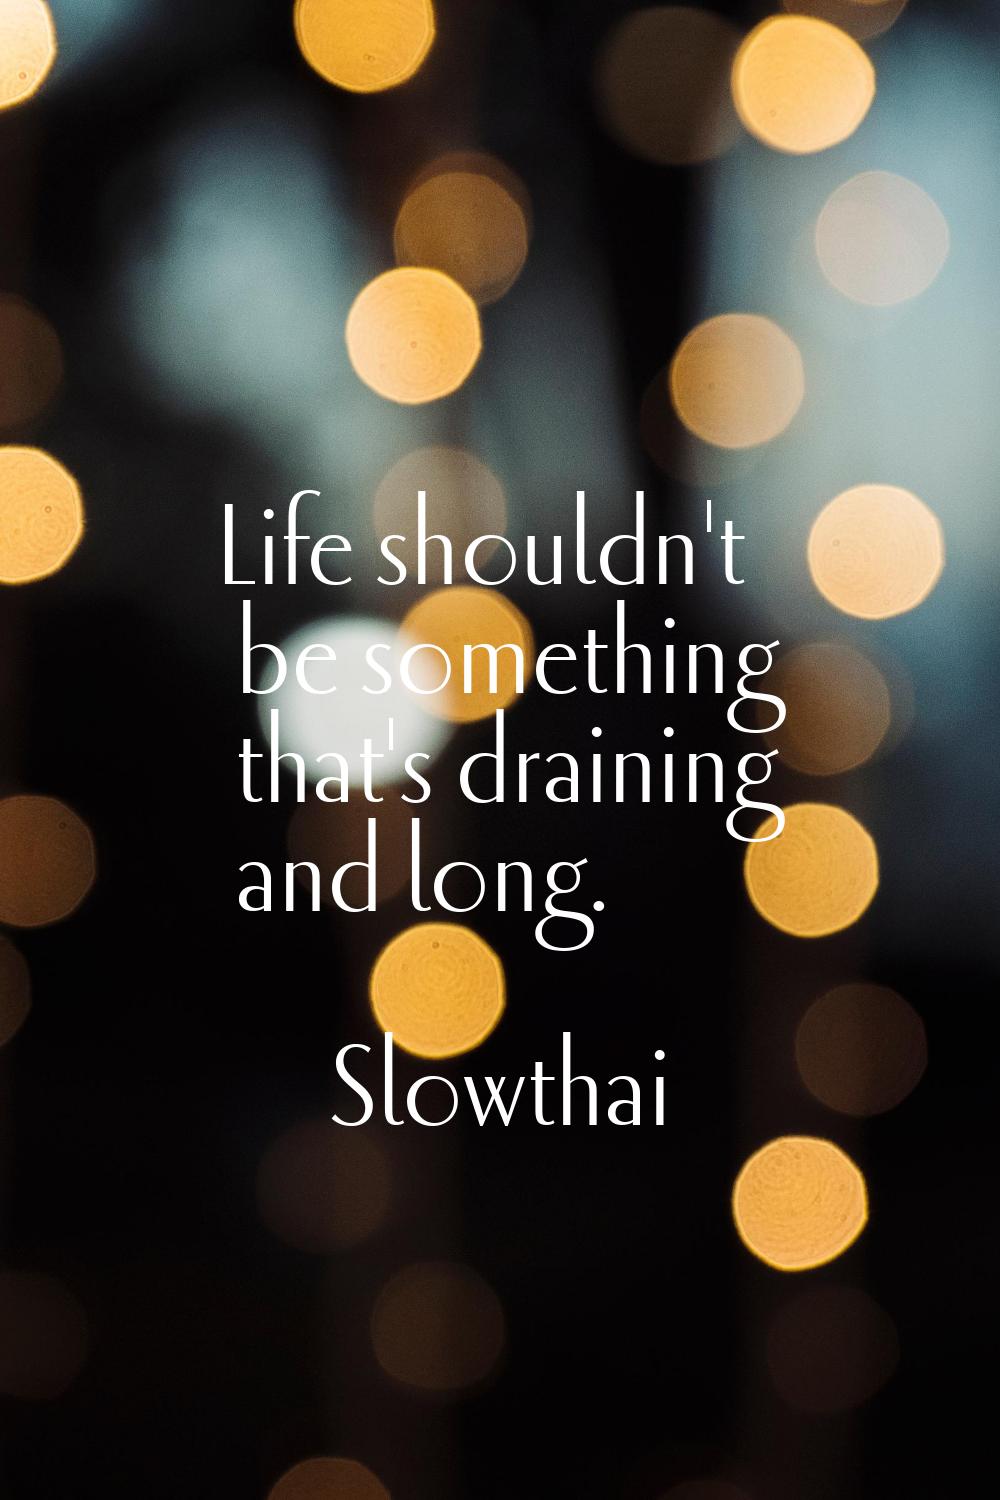 Life shouldn't be something that's draining and long.